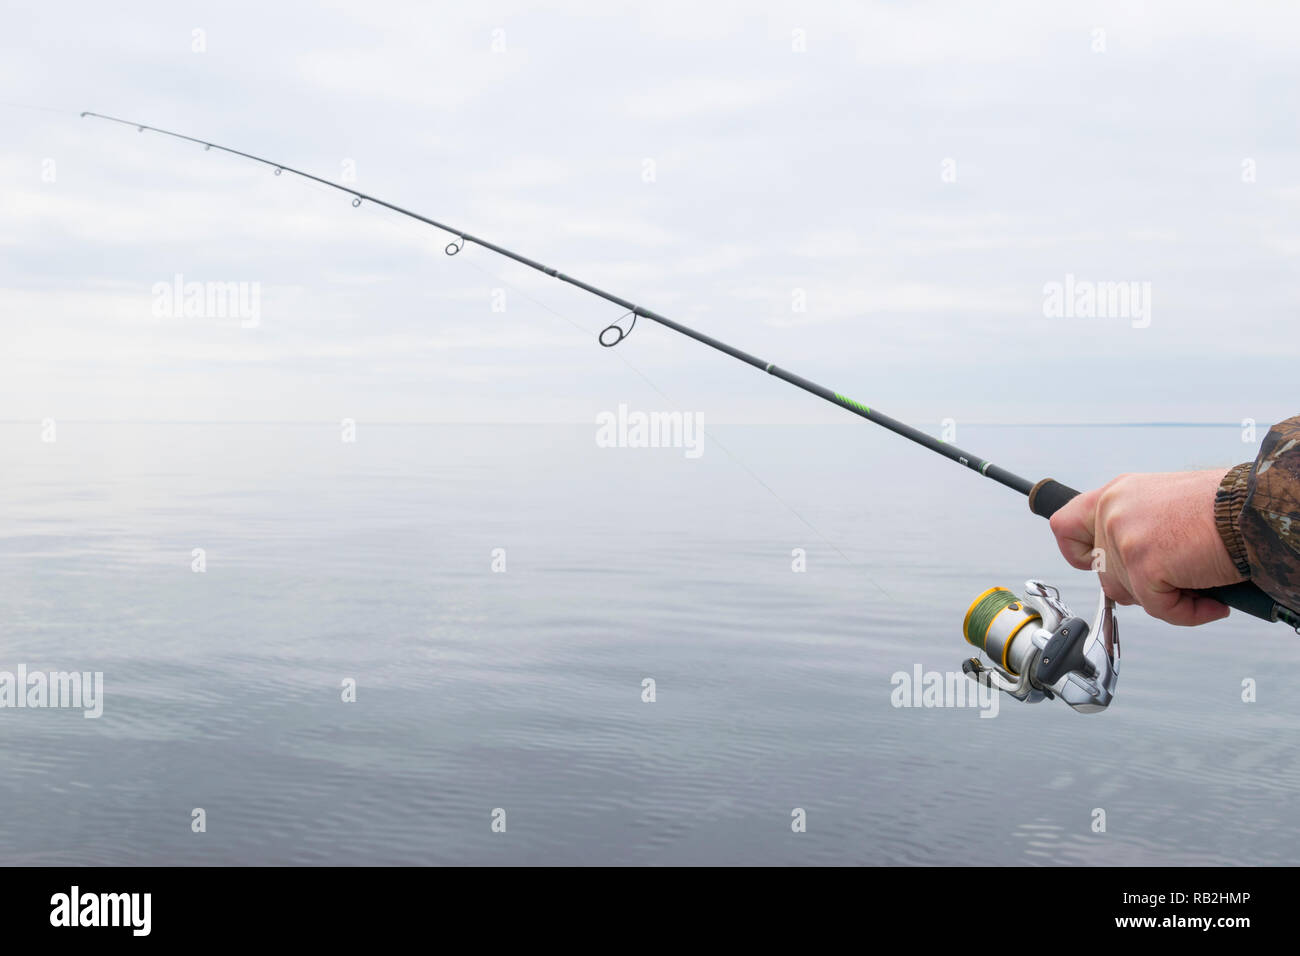 Hands of a fisherman with a spinning rod with the line with a line on a motor boat in the lake on a cloudy day Stock Photo